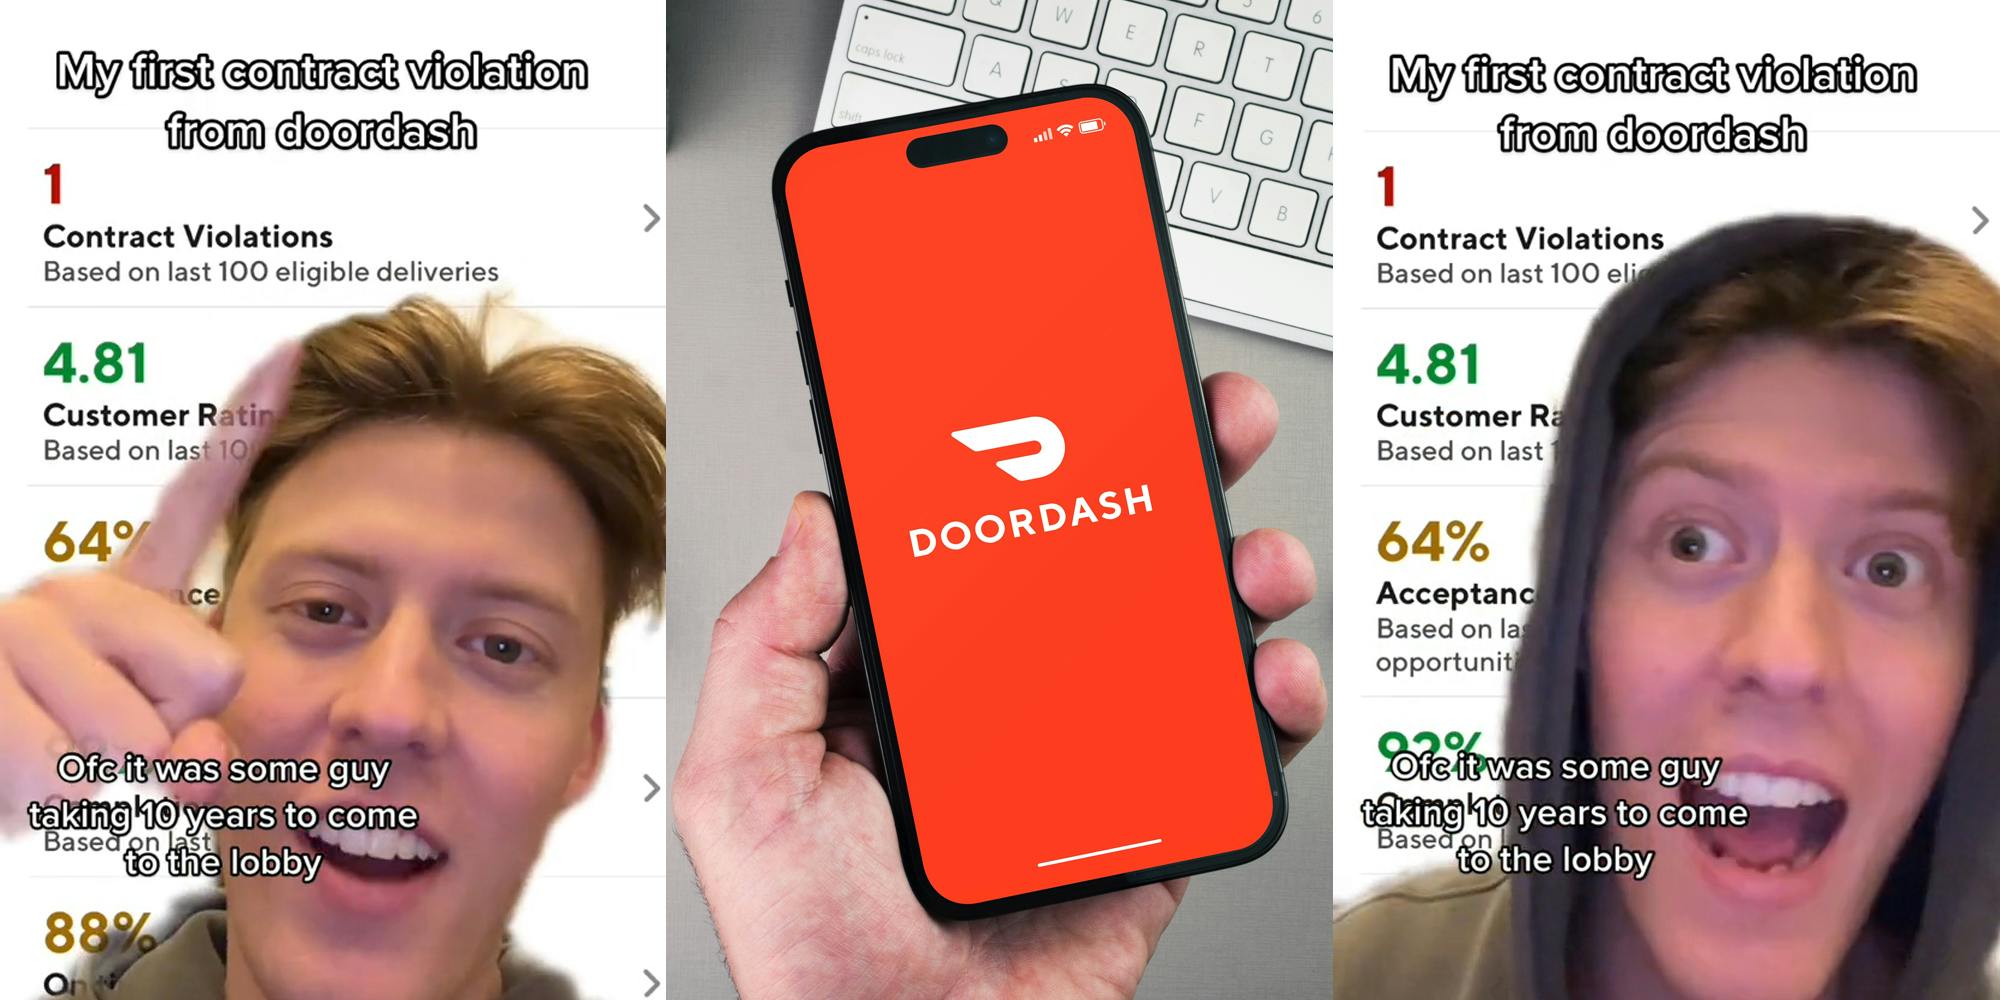 DoorDash employee greenscreen TikTok over violation with caption "Ofc it was some guy taking 10 years to come to the lobby" (l) DooraDash on phone screen in hand above grey desk with keyboard (c) DoorDash employee greenscreen TikTok over violation with caption "Ofc it was some guy taking 10 years to come to the lobby" (r)